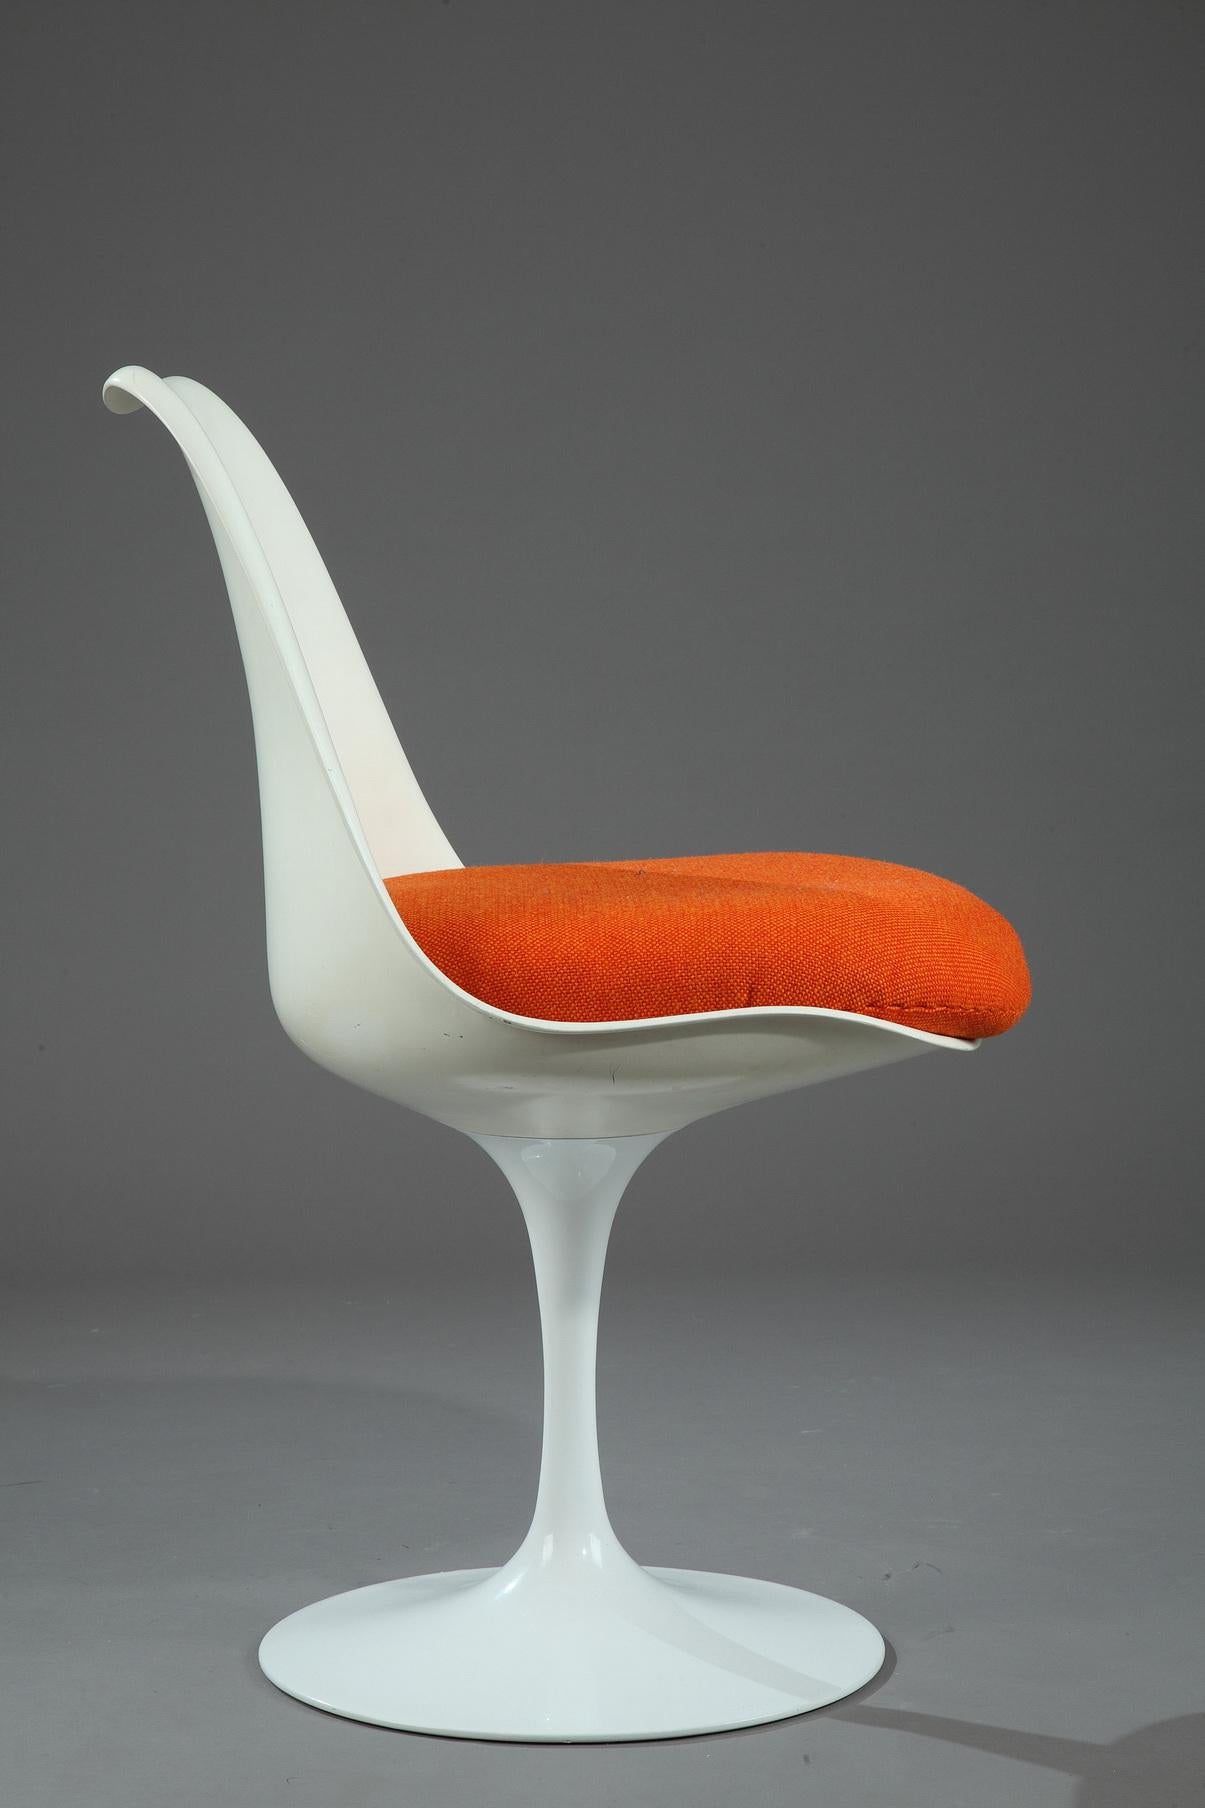 Tulip Chair in bright white metal, with new upholstery in orange fabric. The Tulip Chair is a mythical chair of the 1950s. It was created in 1956 by the designer Eero Saarinen (1910-1961) for Knoll,

circa 1950
Dimensions: W 19.3 in, D 19.7in, H